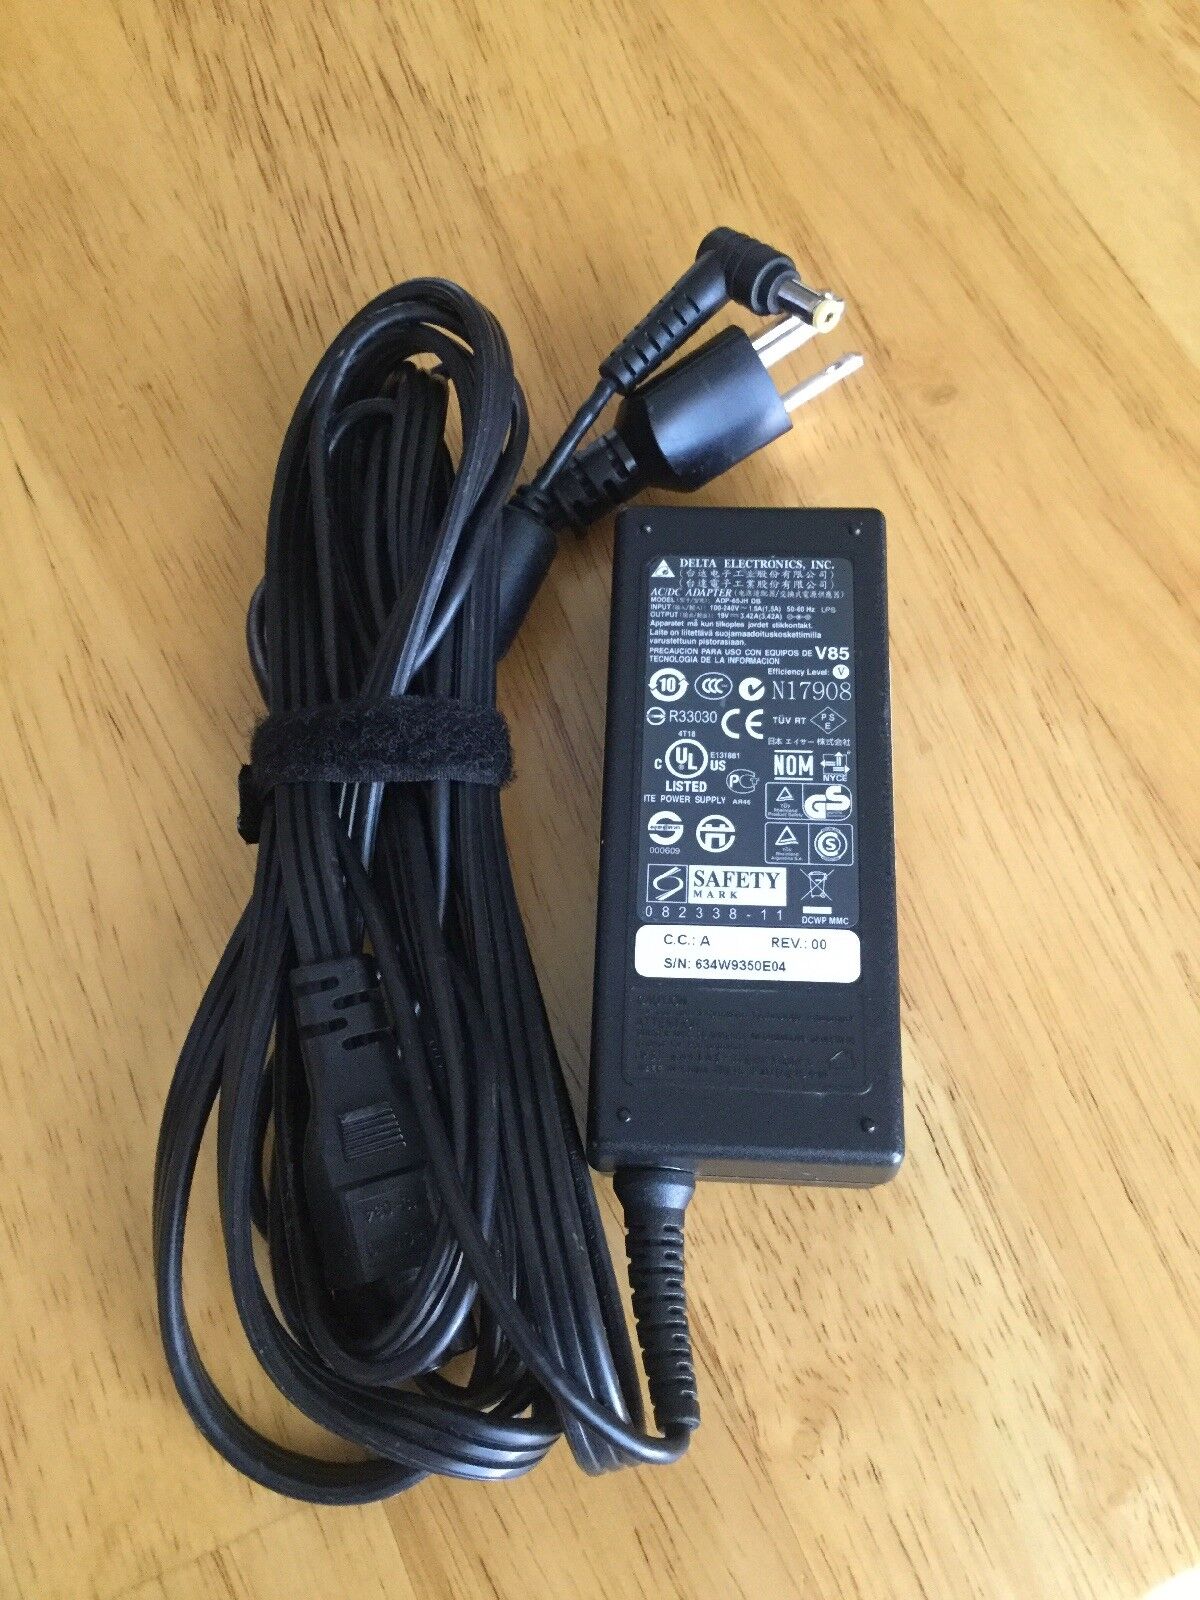 *Brand NEW*Delta electronics 19V 3.42A 65W AC Adapter ASUS Charger ADP-65JH DB POWER Supply